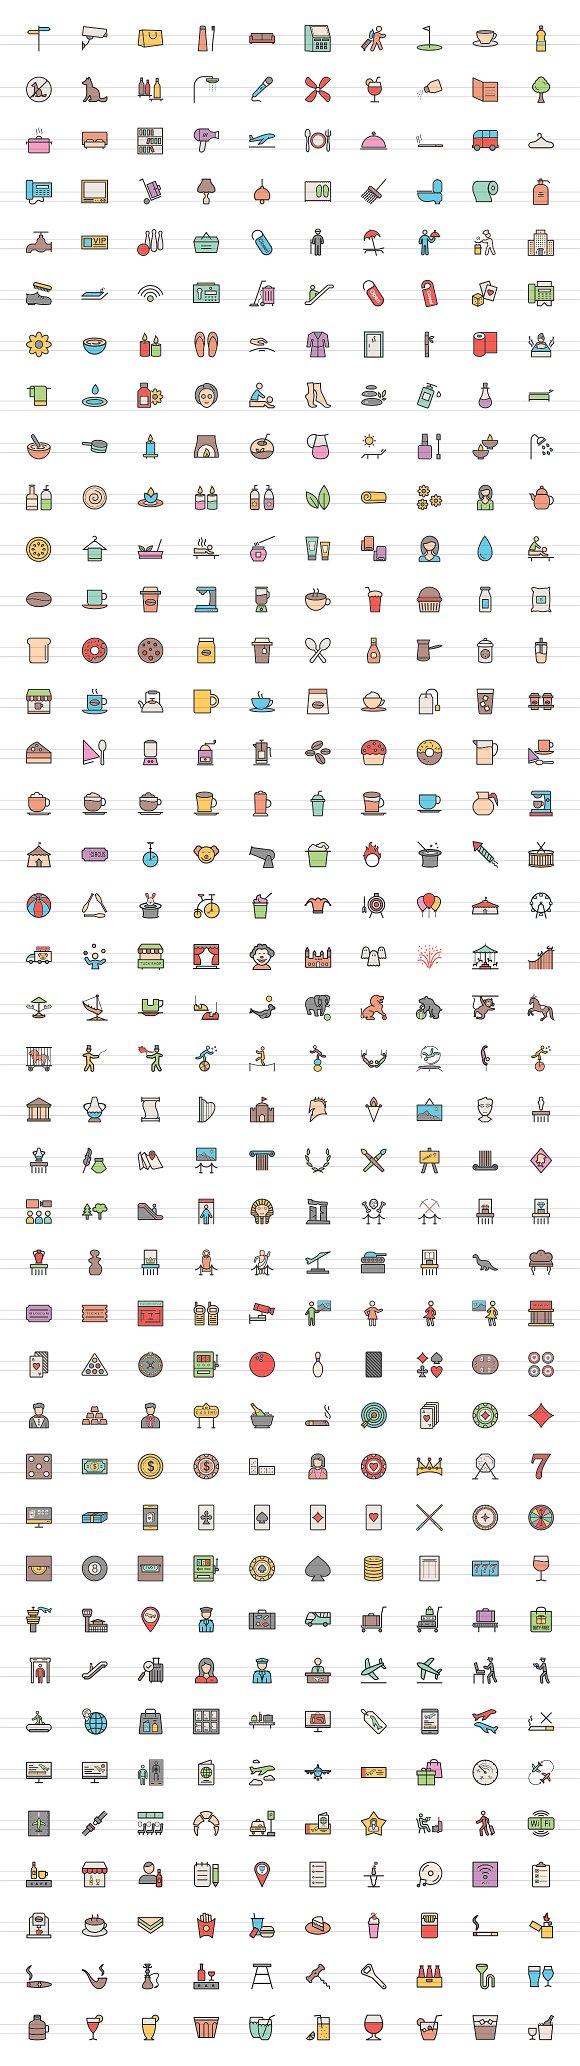 400 Places Filled Line Icons